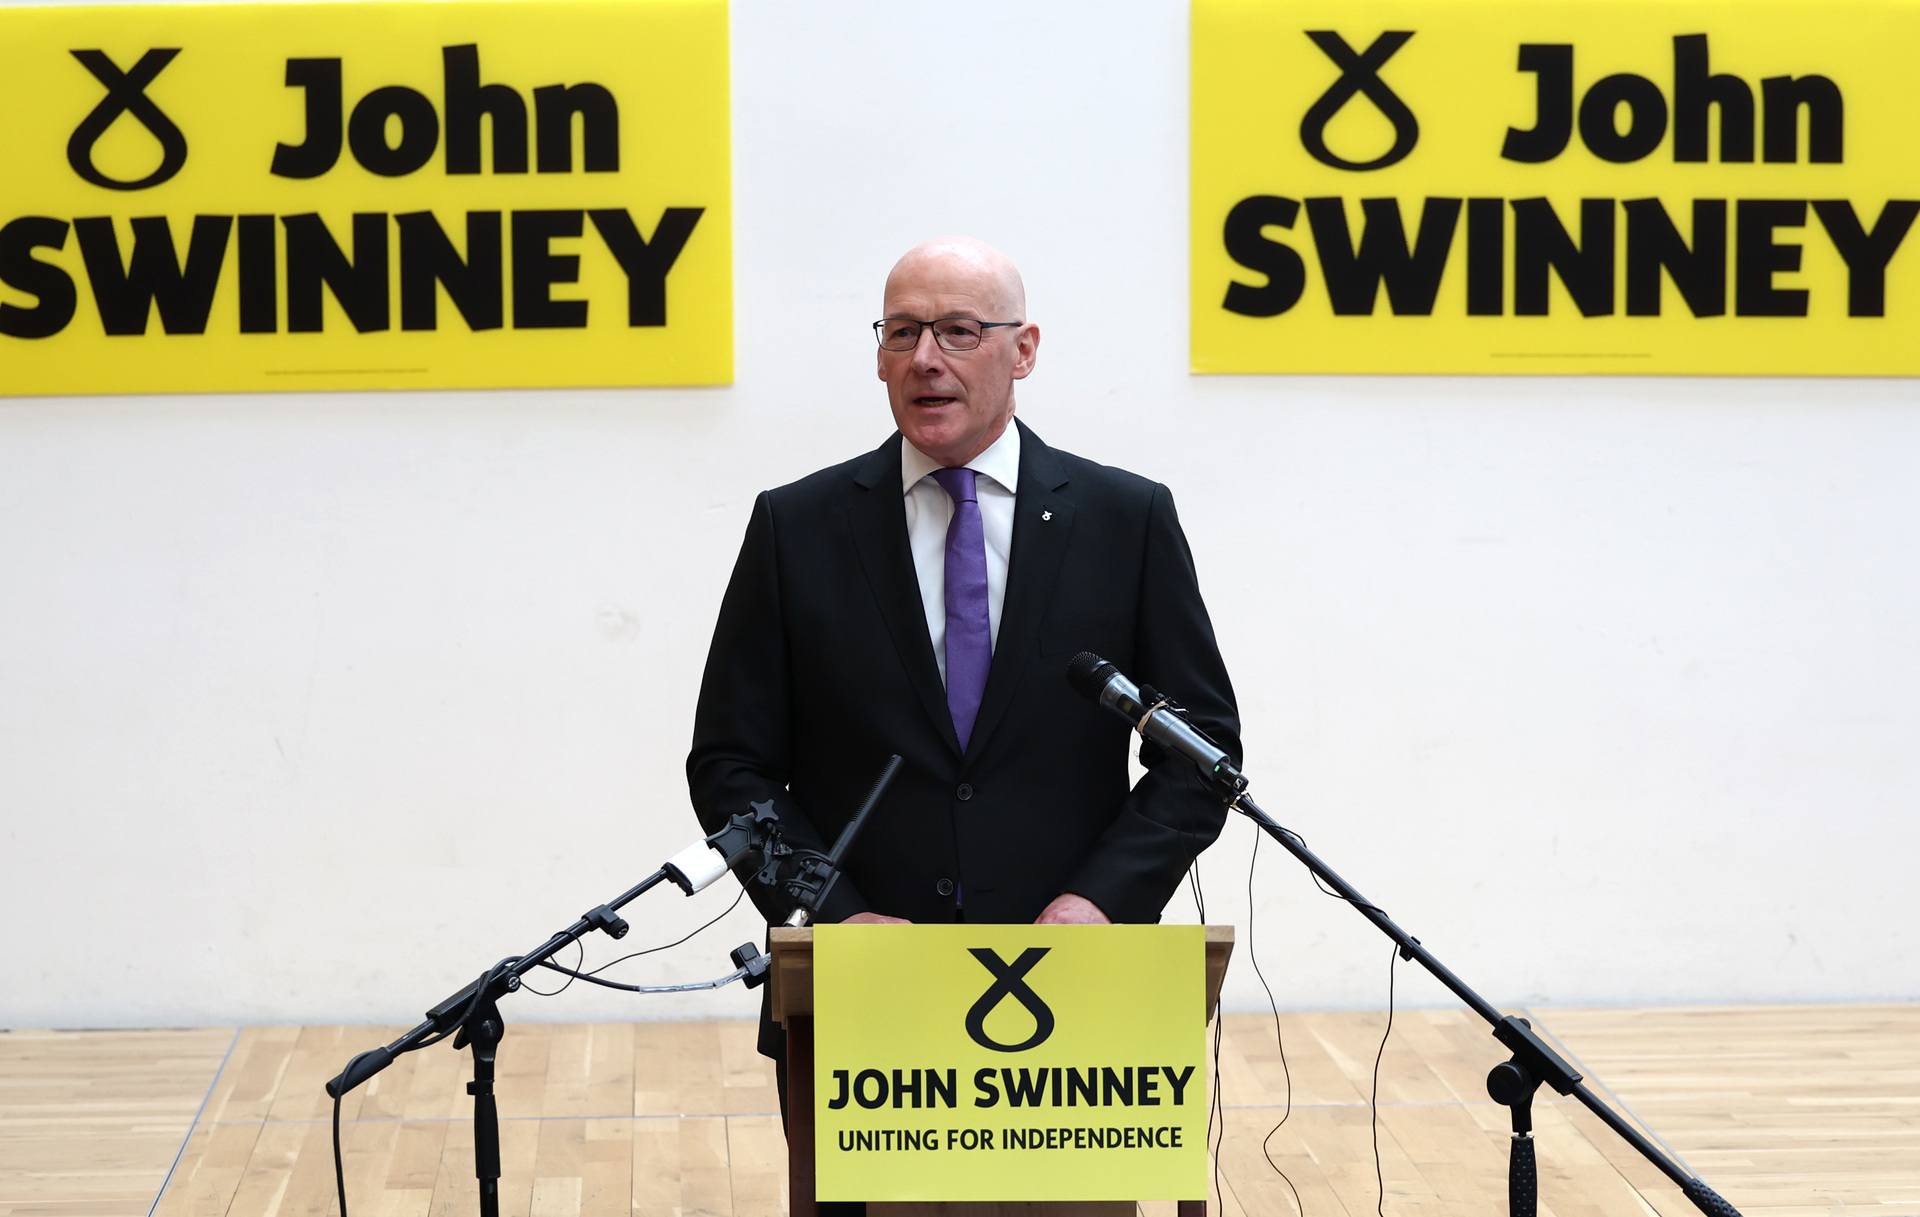 John Swinney could be SNP leader by next week if no one else runs against him.